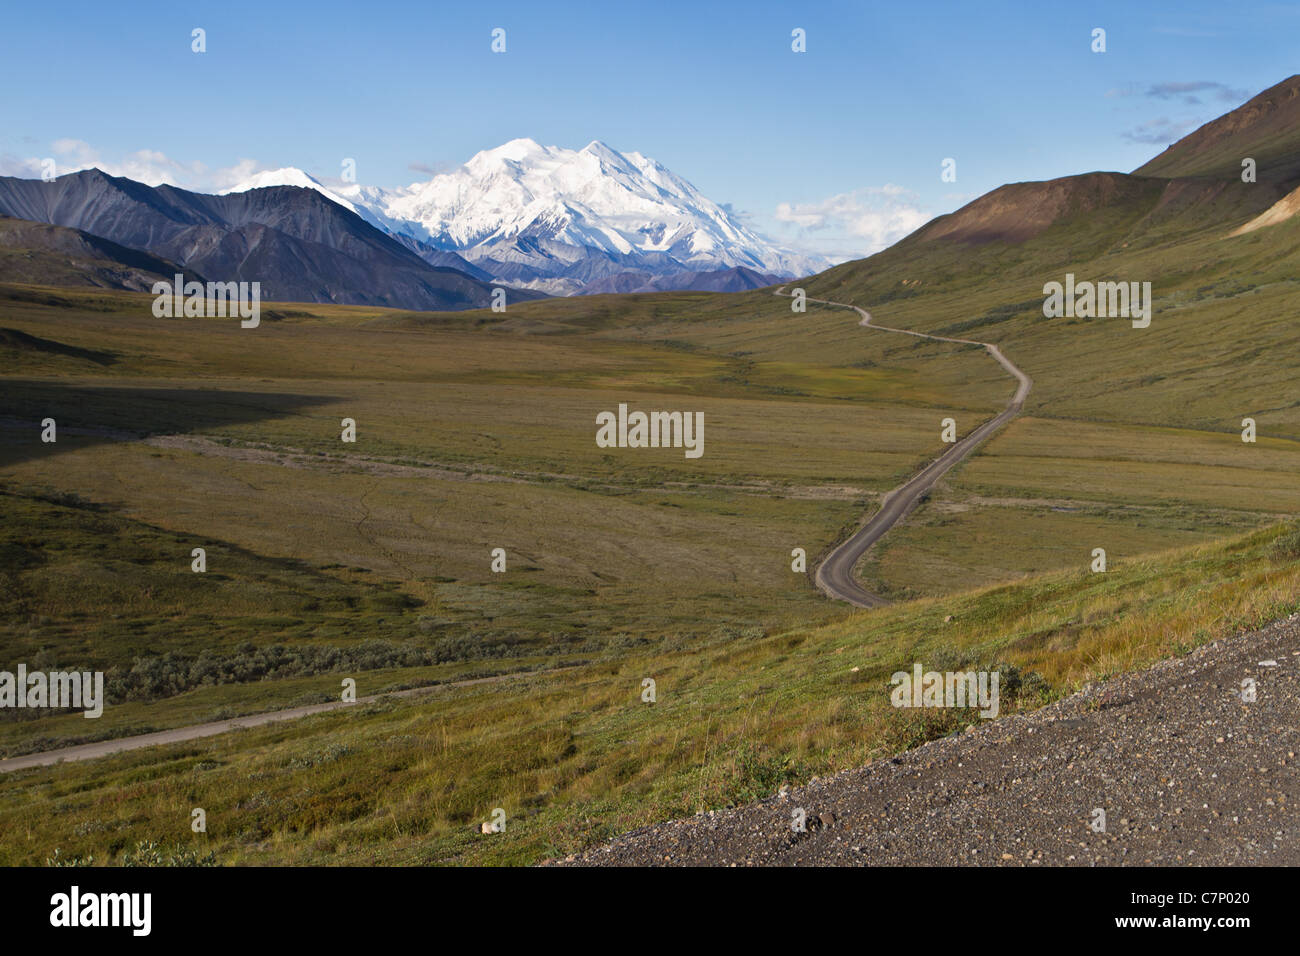 The view of Mt. McKinley (Denali) from the park road at Thoroughfare Pass, Denali National Park, AK, USA. Stock Photo